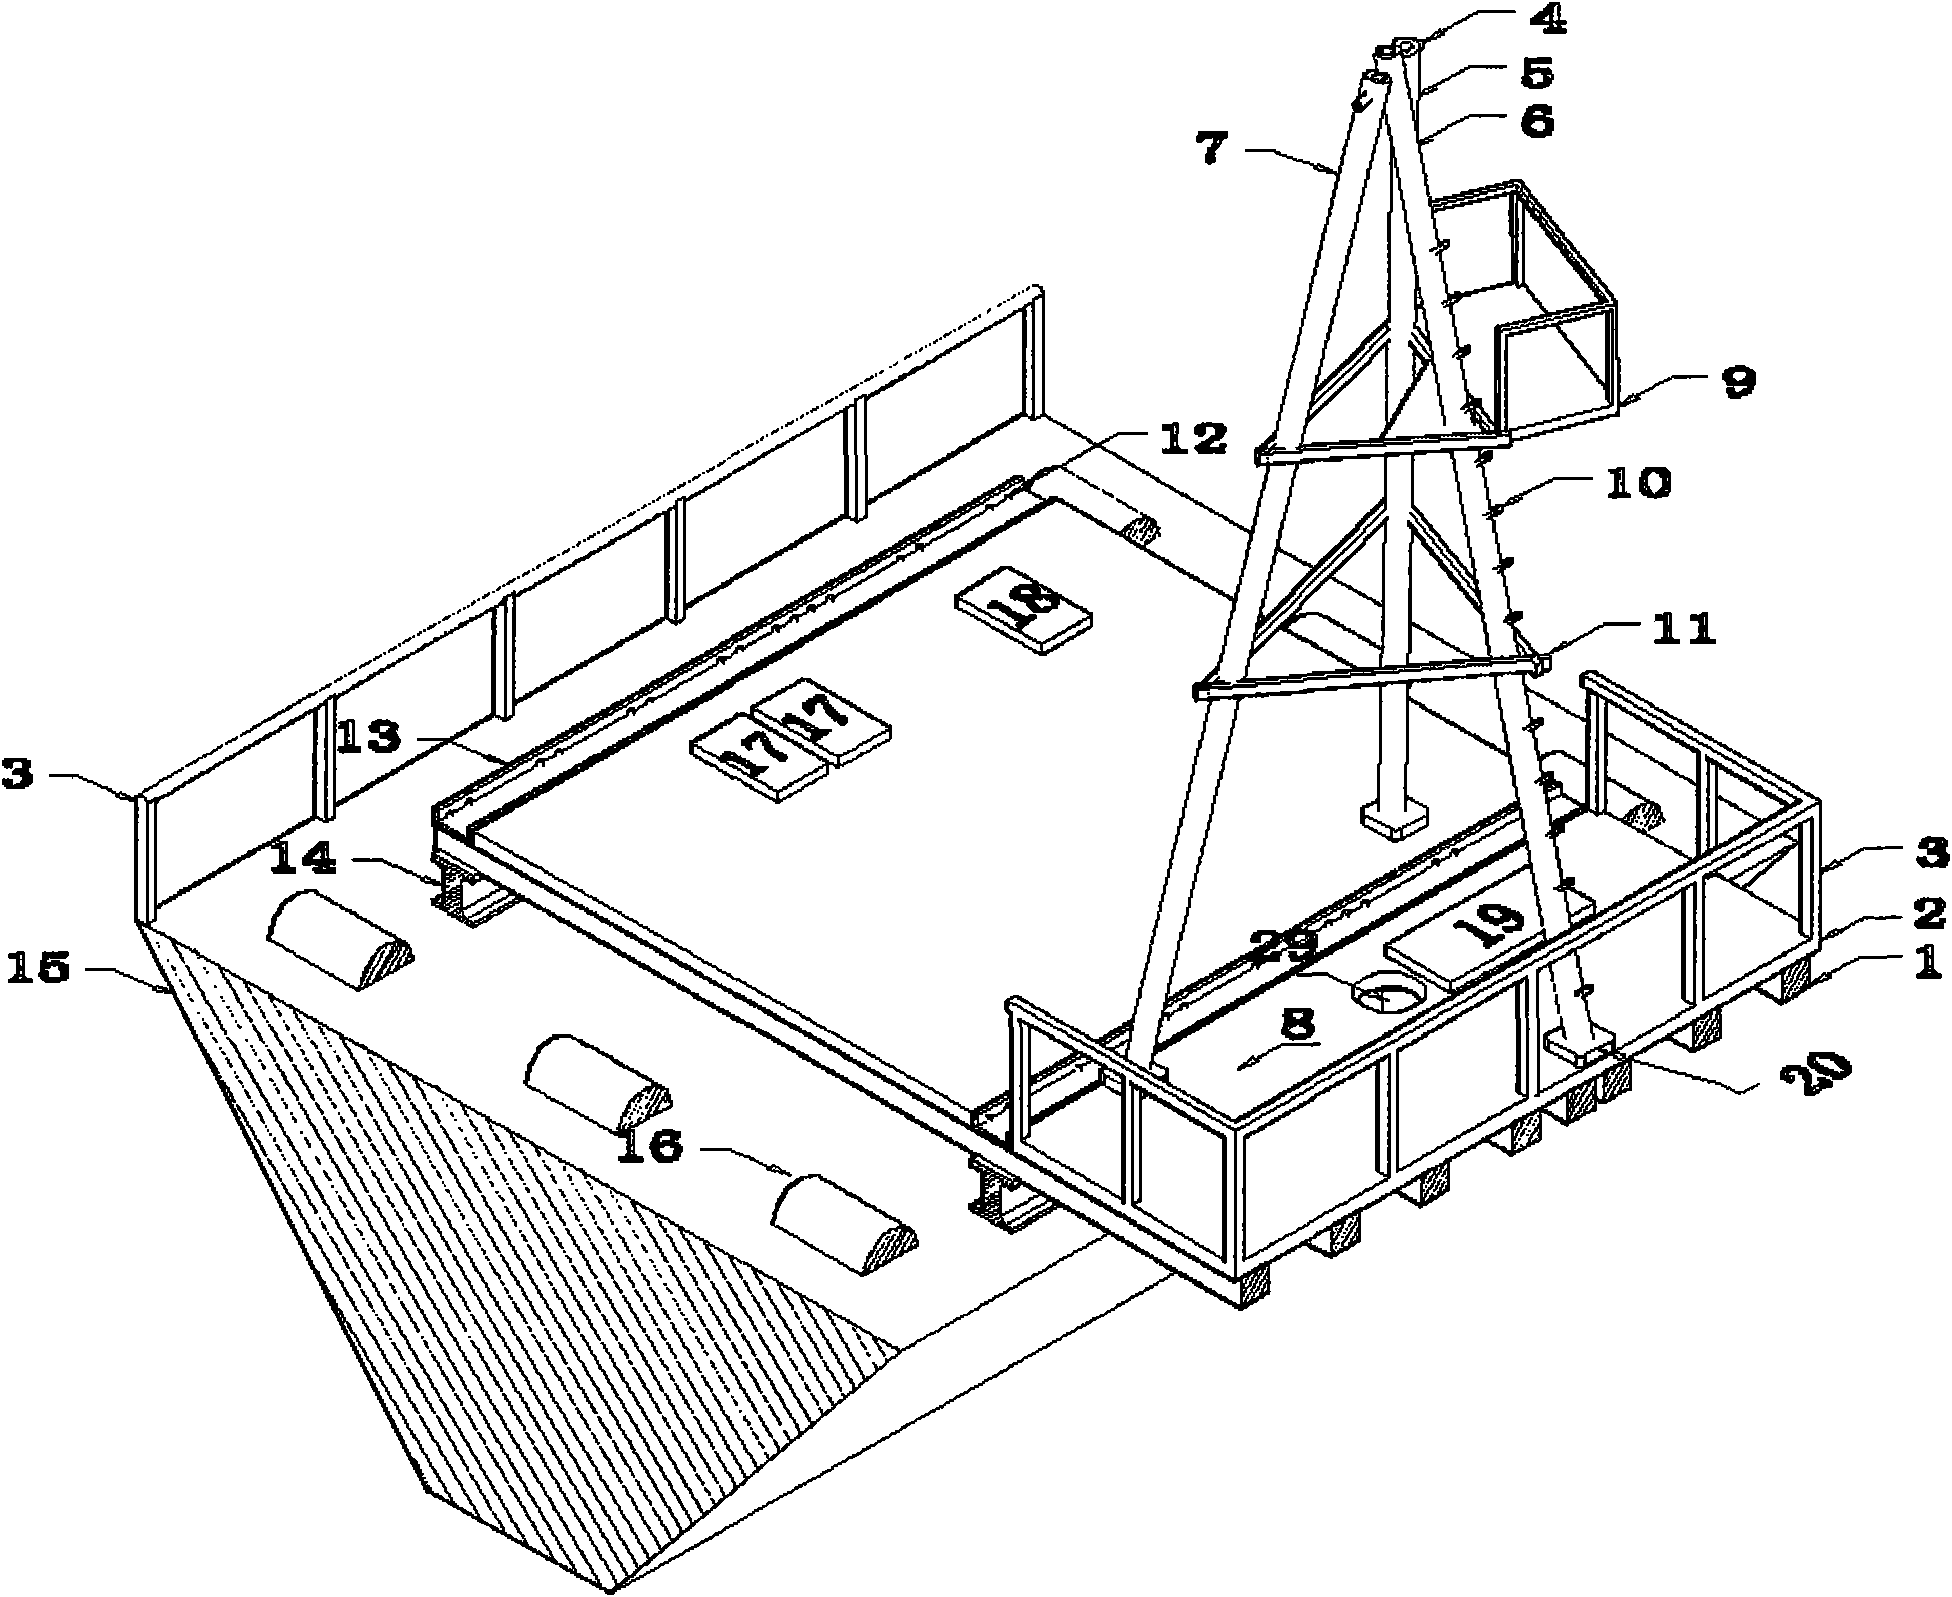 Unilateral cantilever type water survey platform system